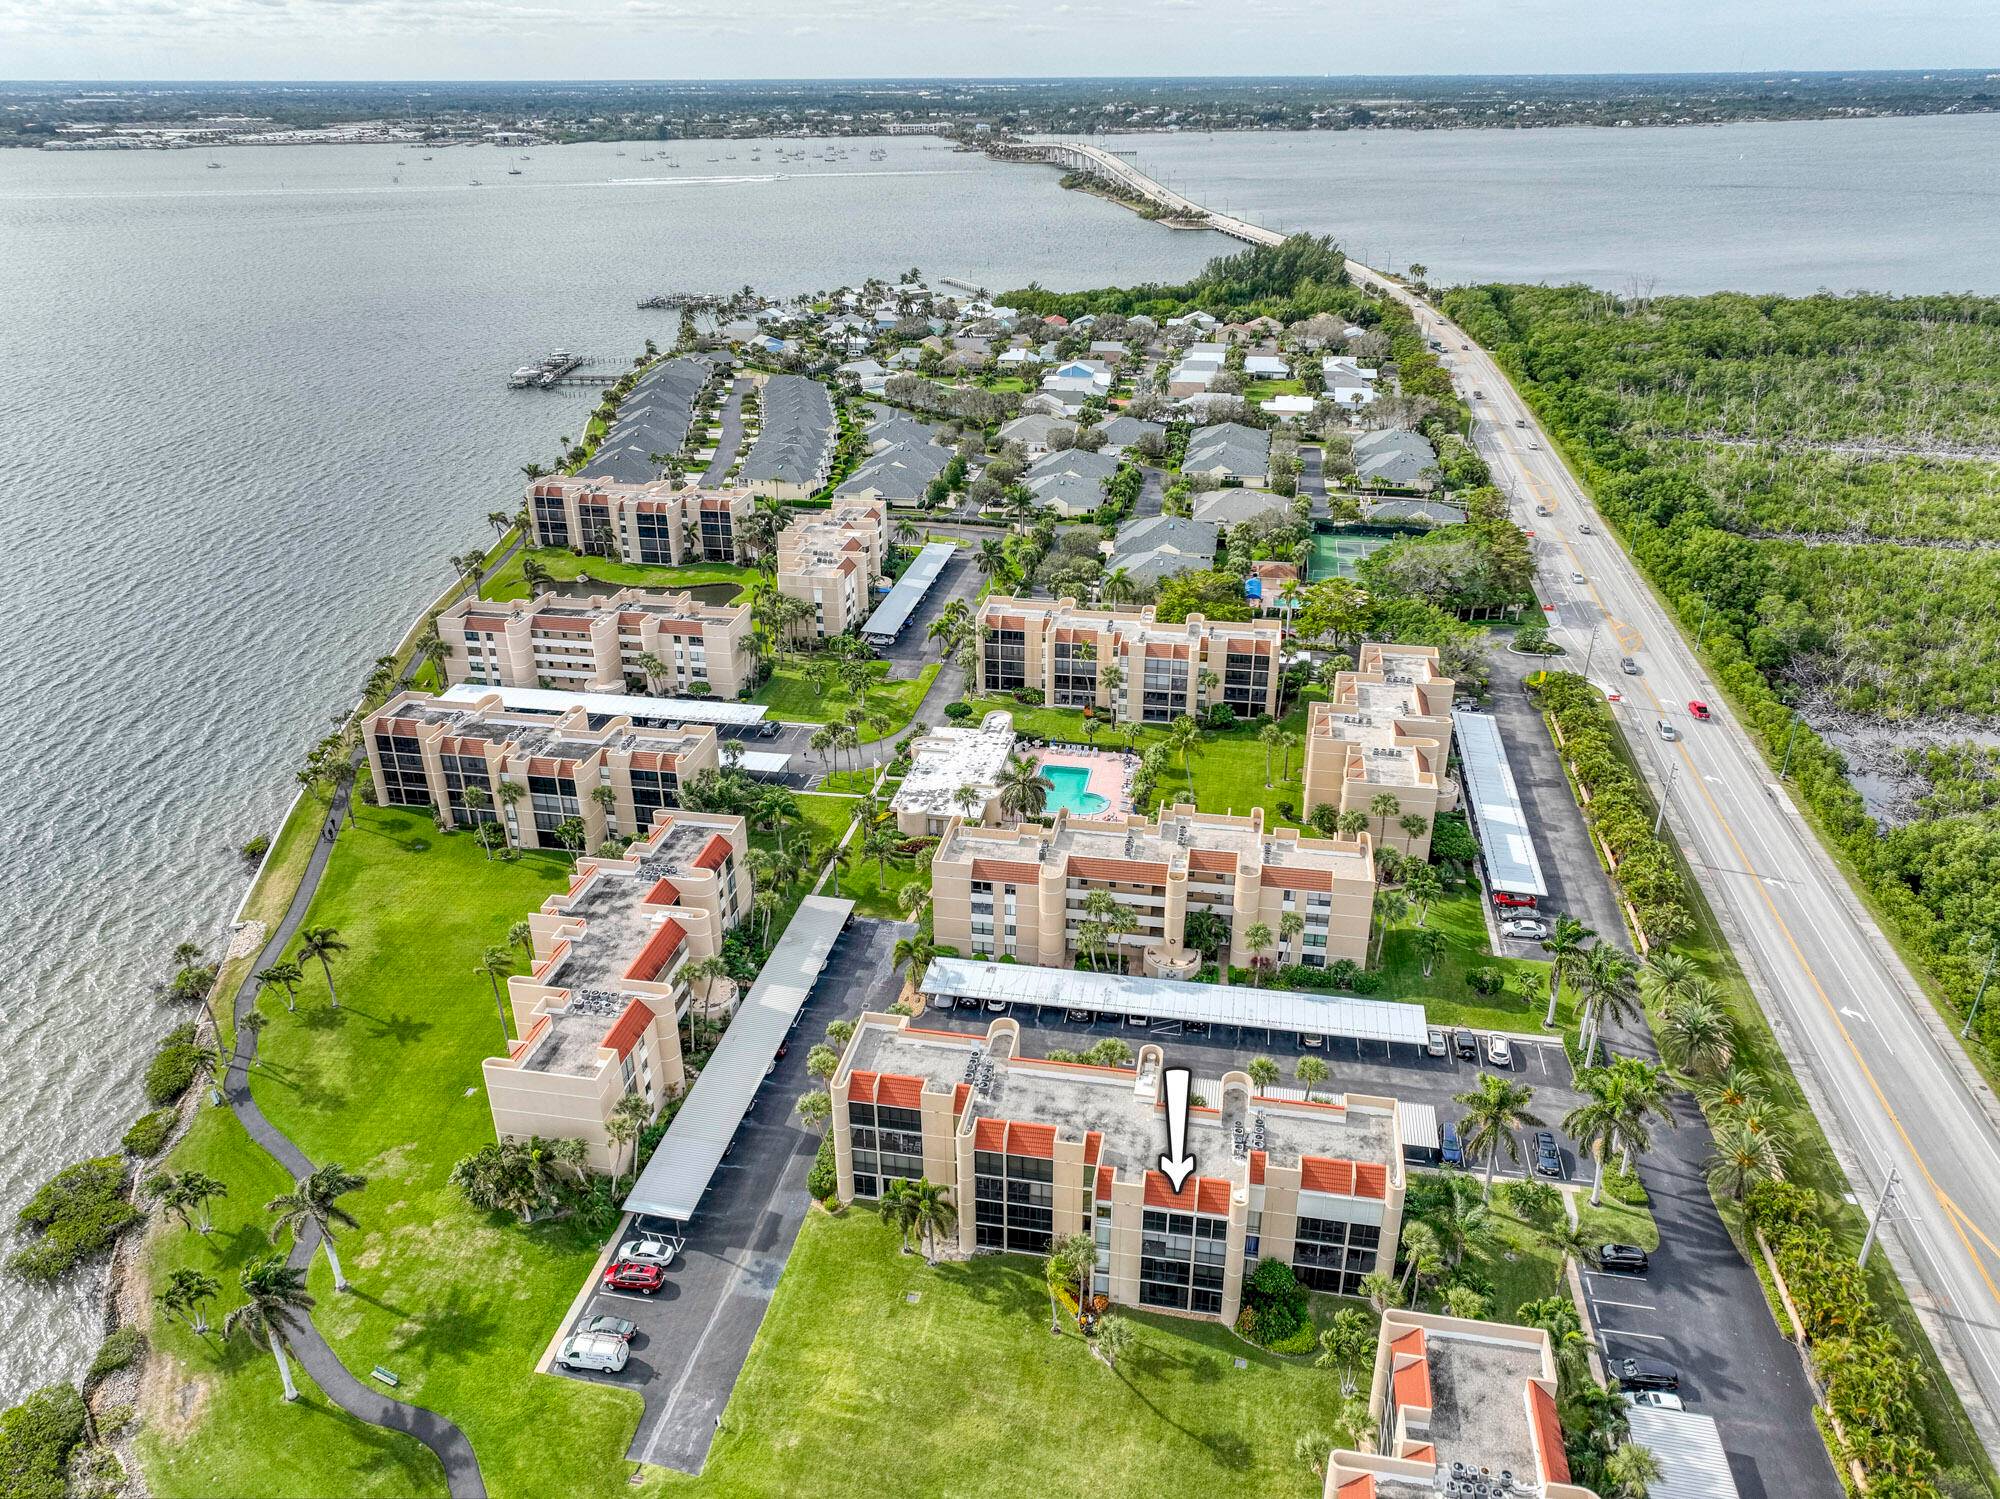 Come enjoy this fully furnished, 2 bedroom, 2 bath condo with gorgeous INTRACOASTAL VIEWS in the desirable, GATED COMMUNITY of Fairwinds Cove.